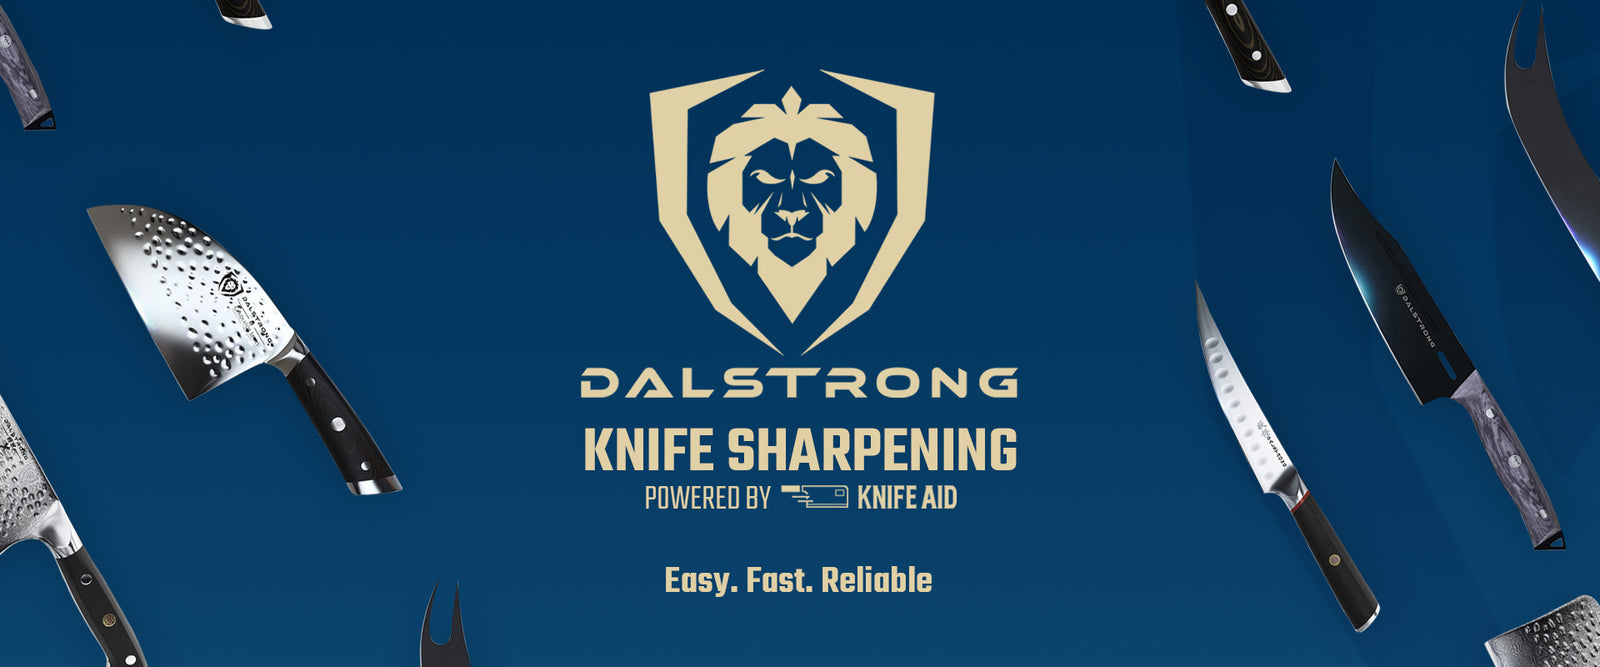 Dalstrong gold lionhead logo surrounded by knives against a blue background promoting knife sharpening service